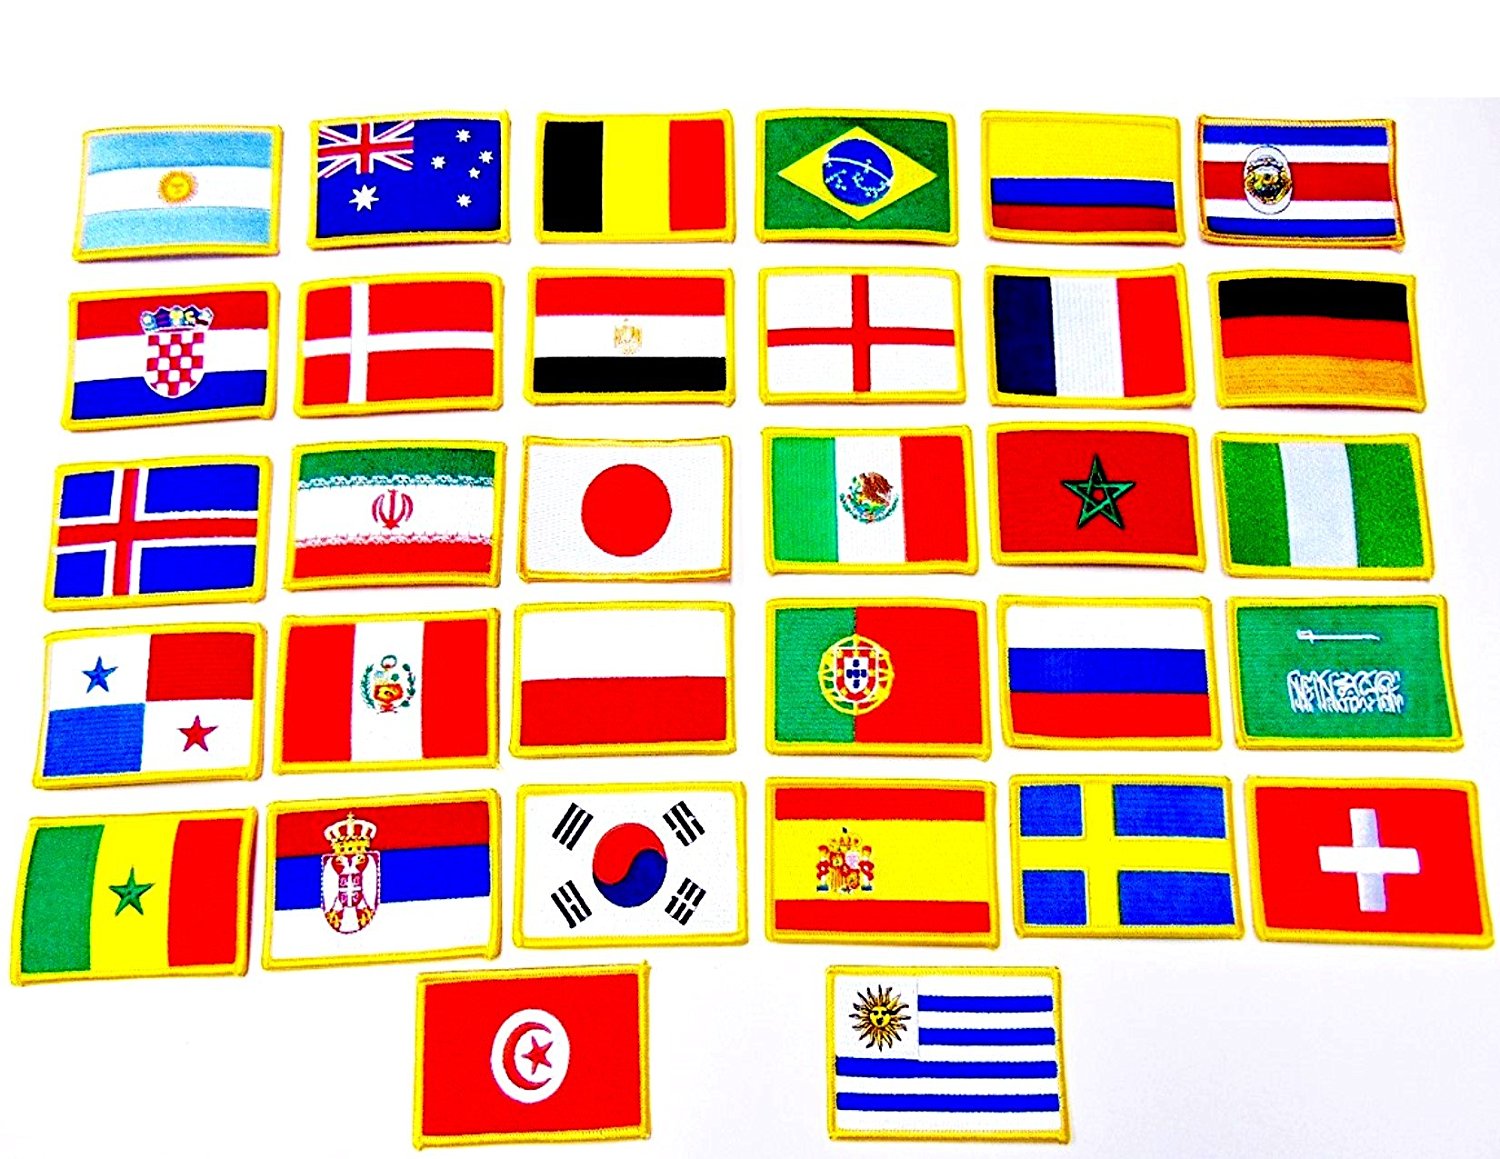 World Cup Flag Patches, complete 24 patch set, one embroidered patch  representing each team